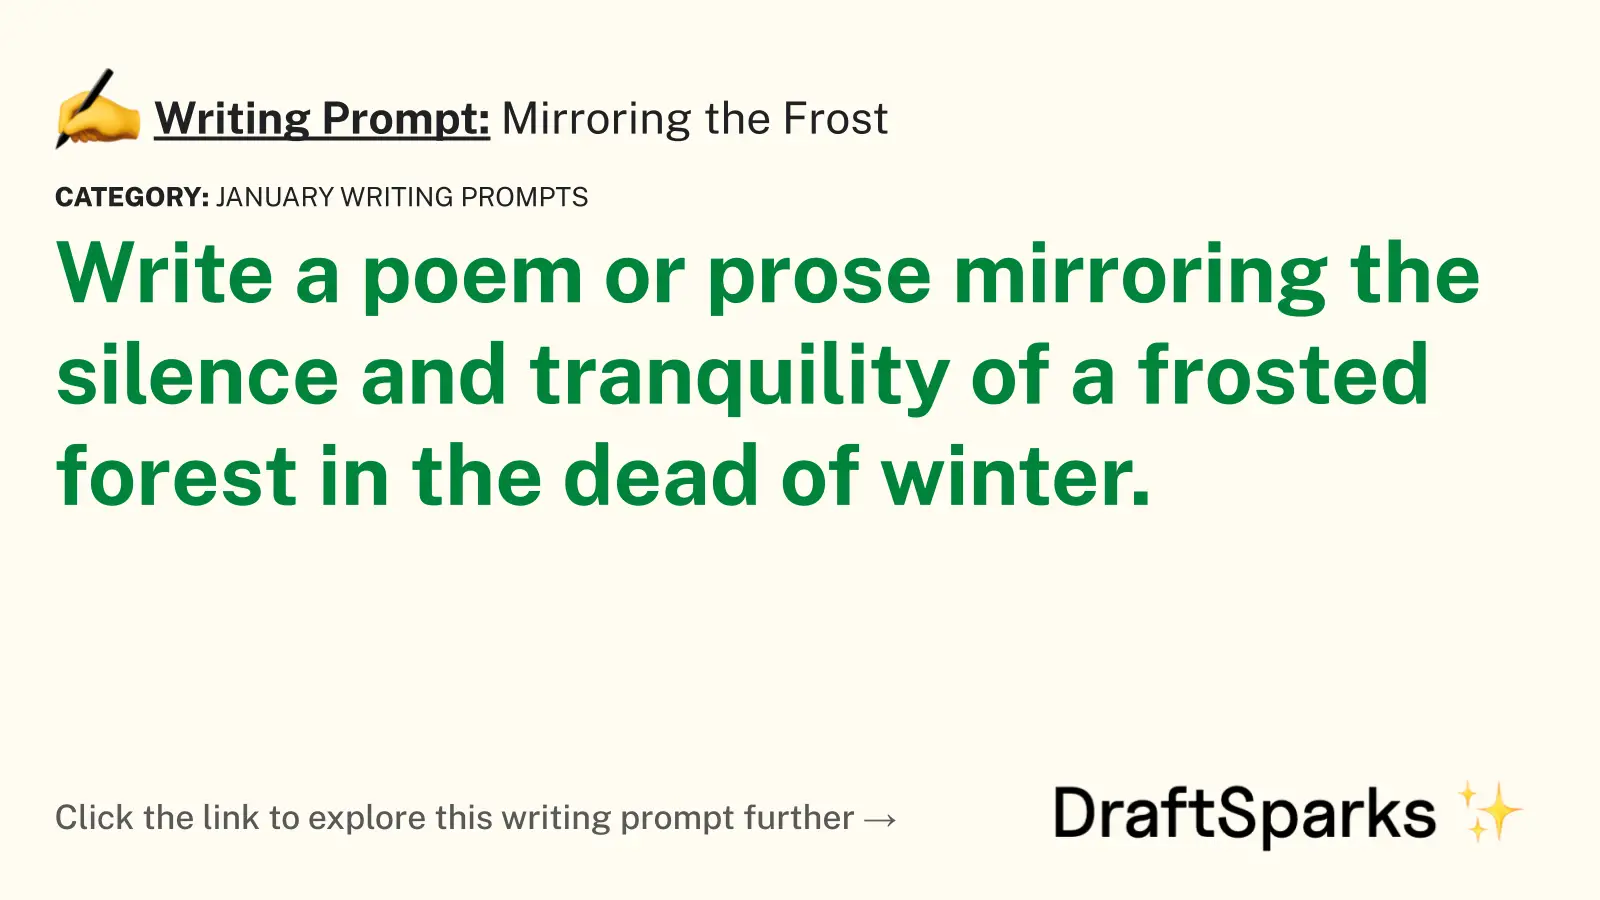 Mirroring the Frost